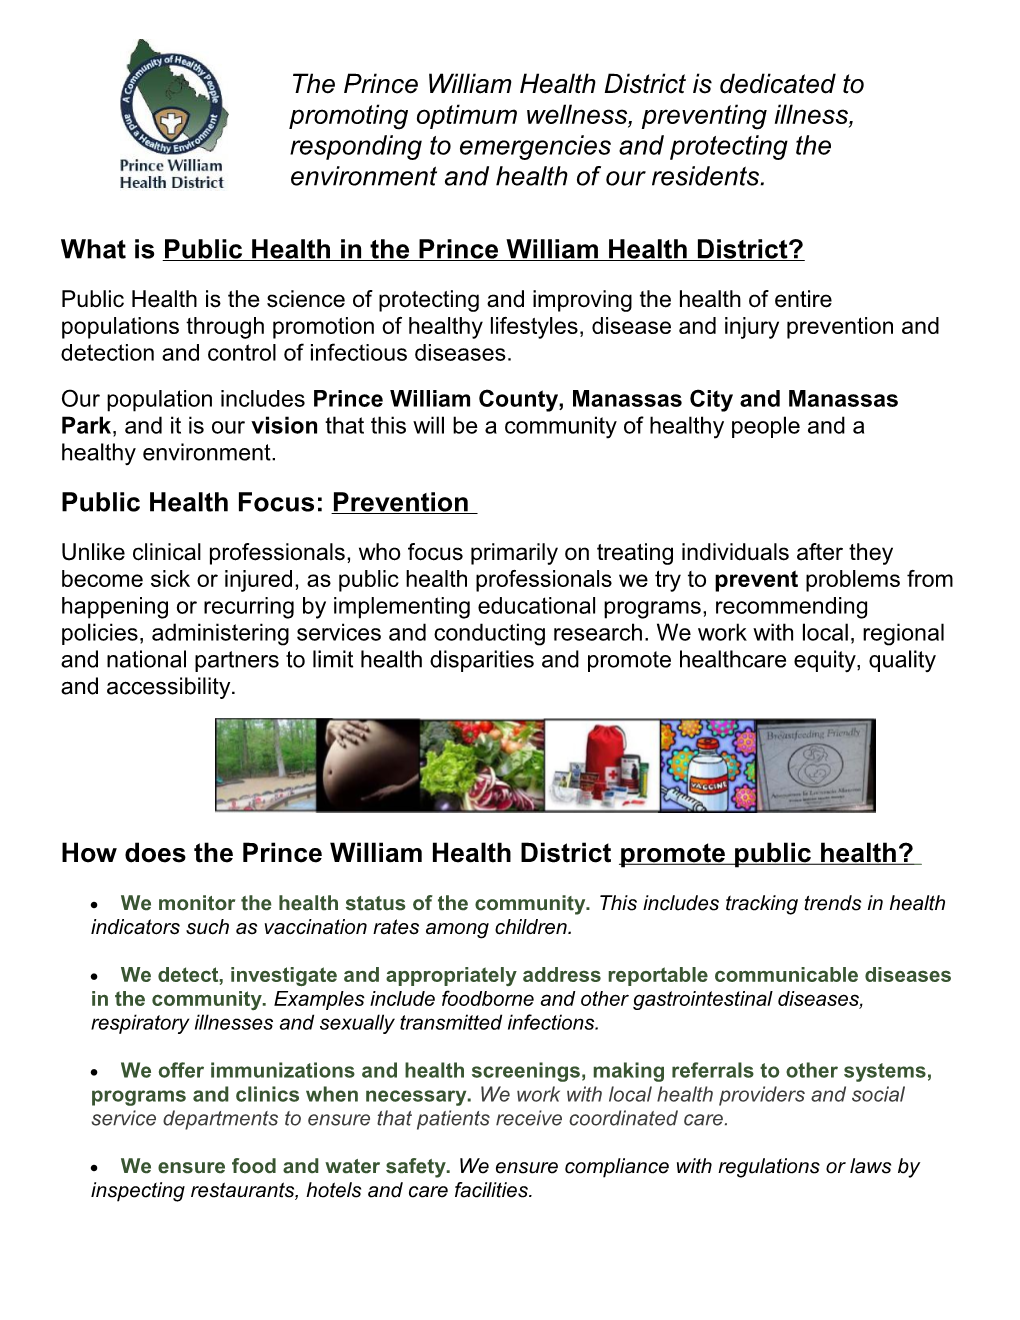 What Is Public Health in the Prince William Health District?